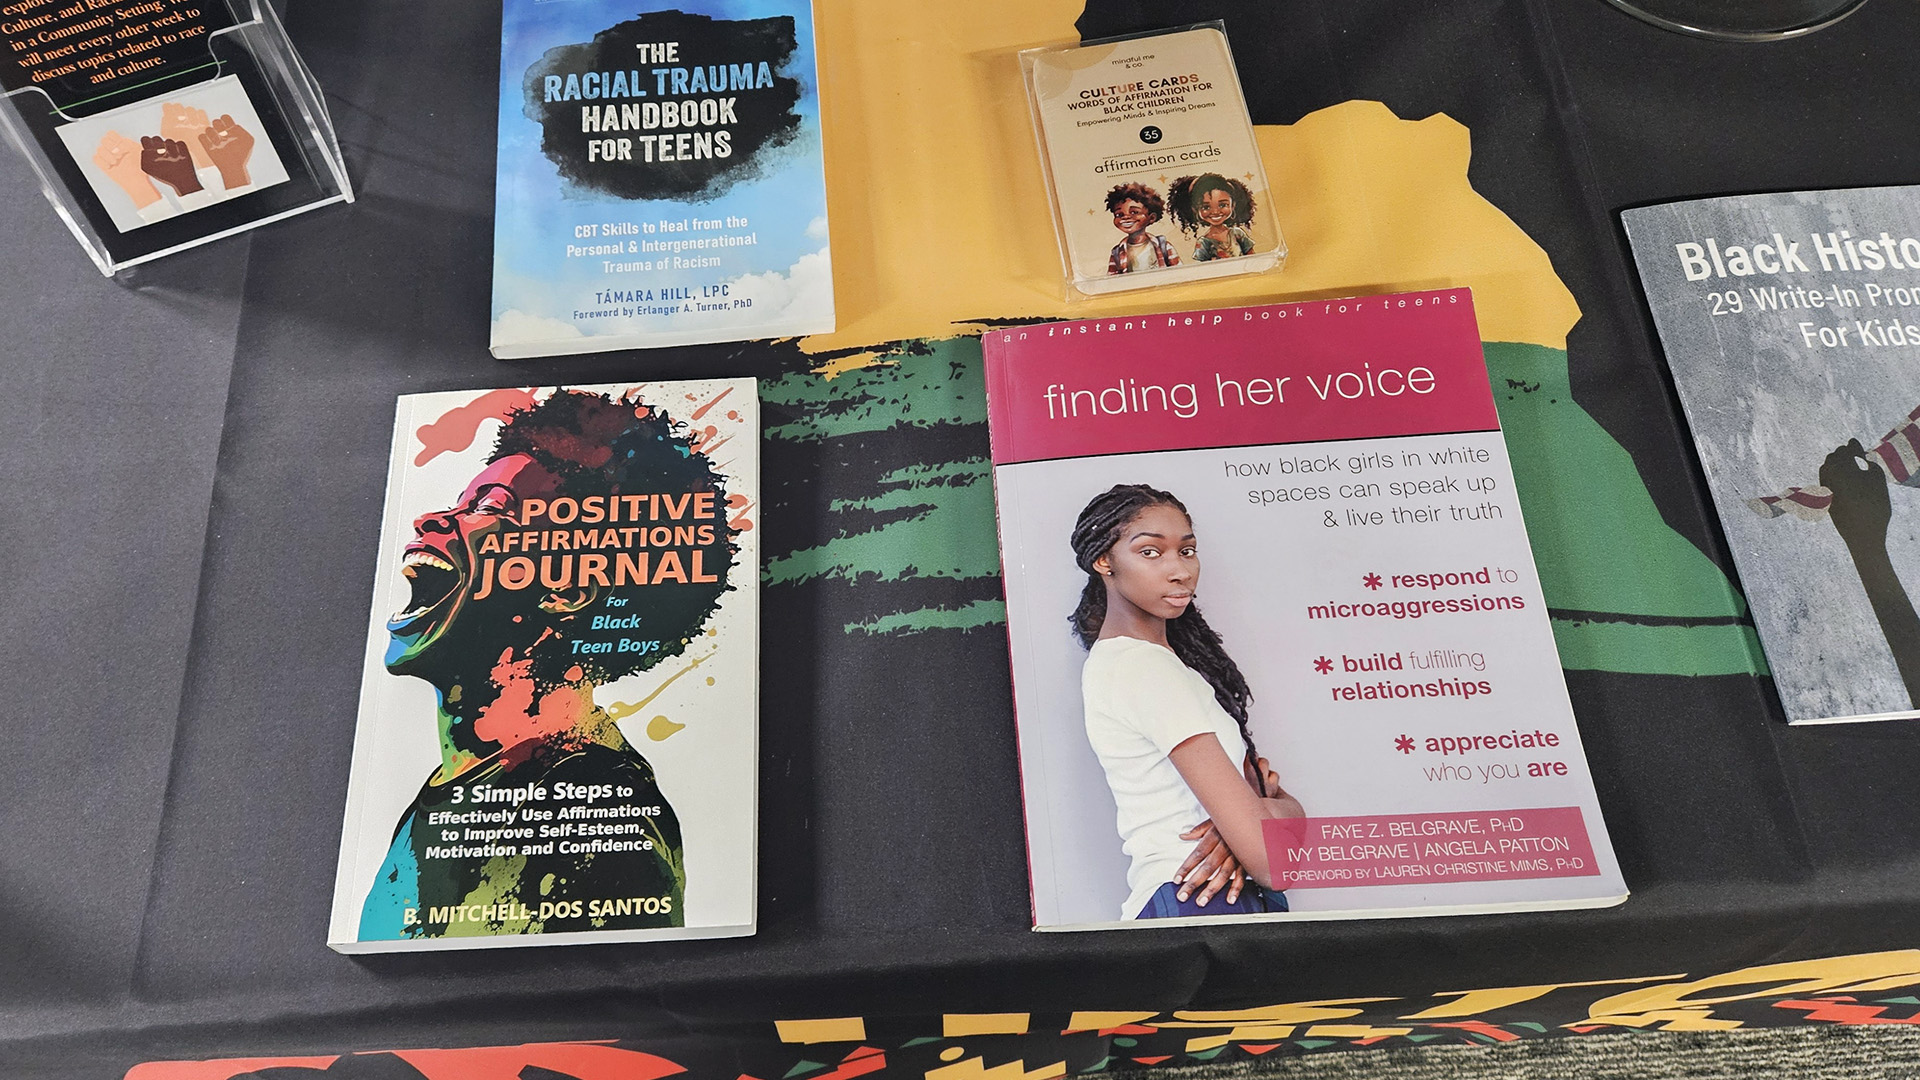 Multiple books, including those titled "The Racial Trauma Handbook for Teens," "Positive Affirmations Journal for Black Teen Boys," and "Finding Her Voice: How Black Girls in White Spaces Can Speak Up & Live Their Truth" sit atop a tablecloth with Pan-African colors on a table.